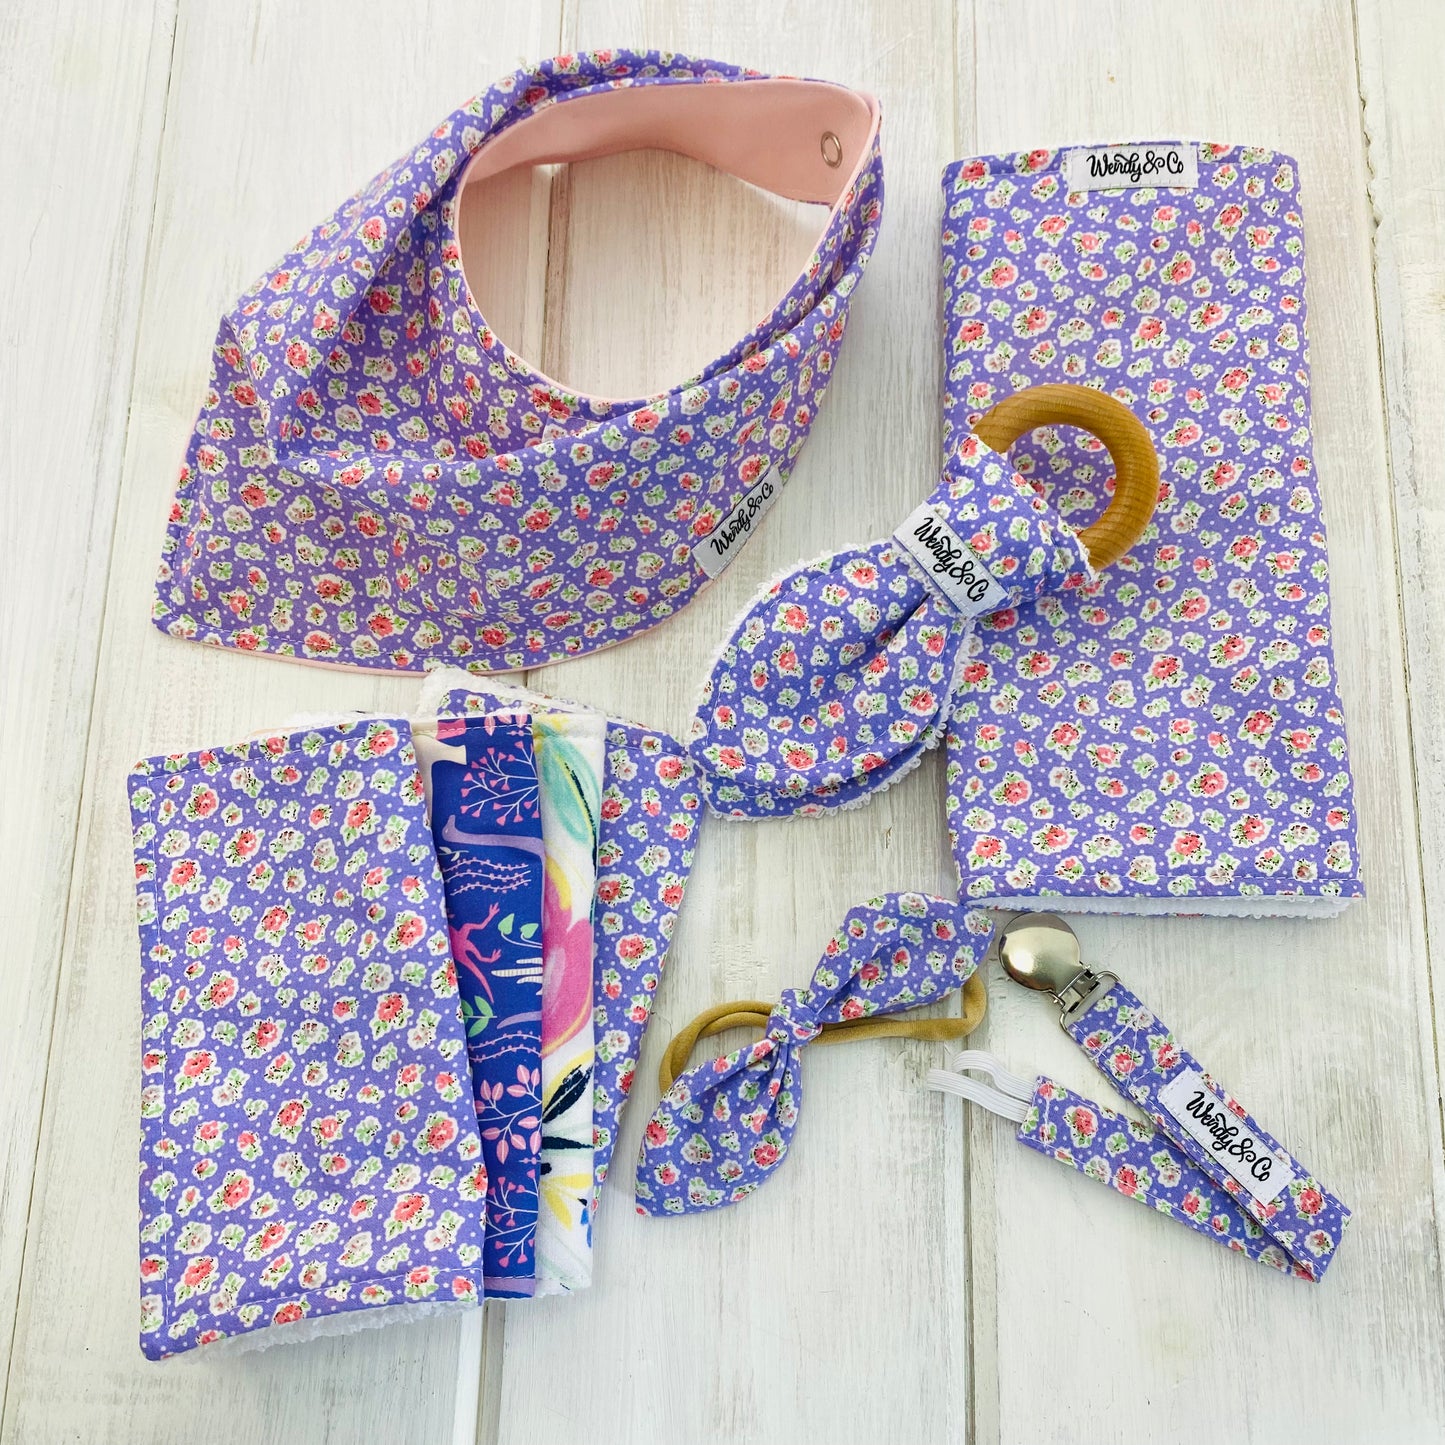 Baby girl gift set in lilac lavender purple with pink flowers. Bandana bib, teether, burp cloth, washing cloths, headband and paci clip.